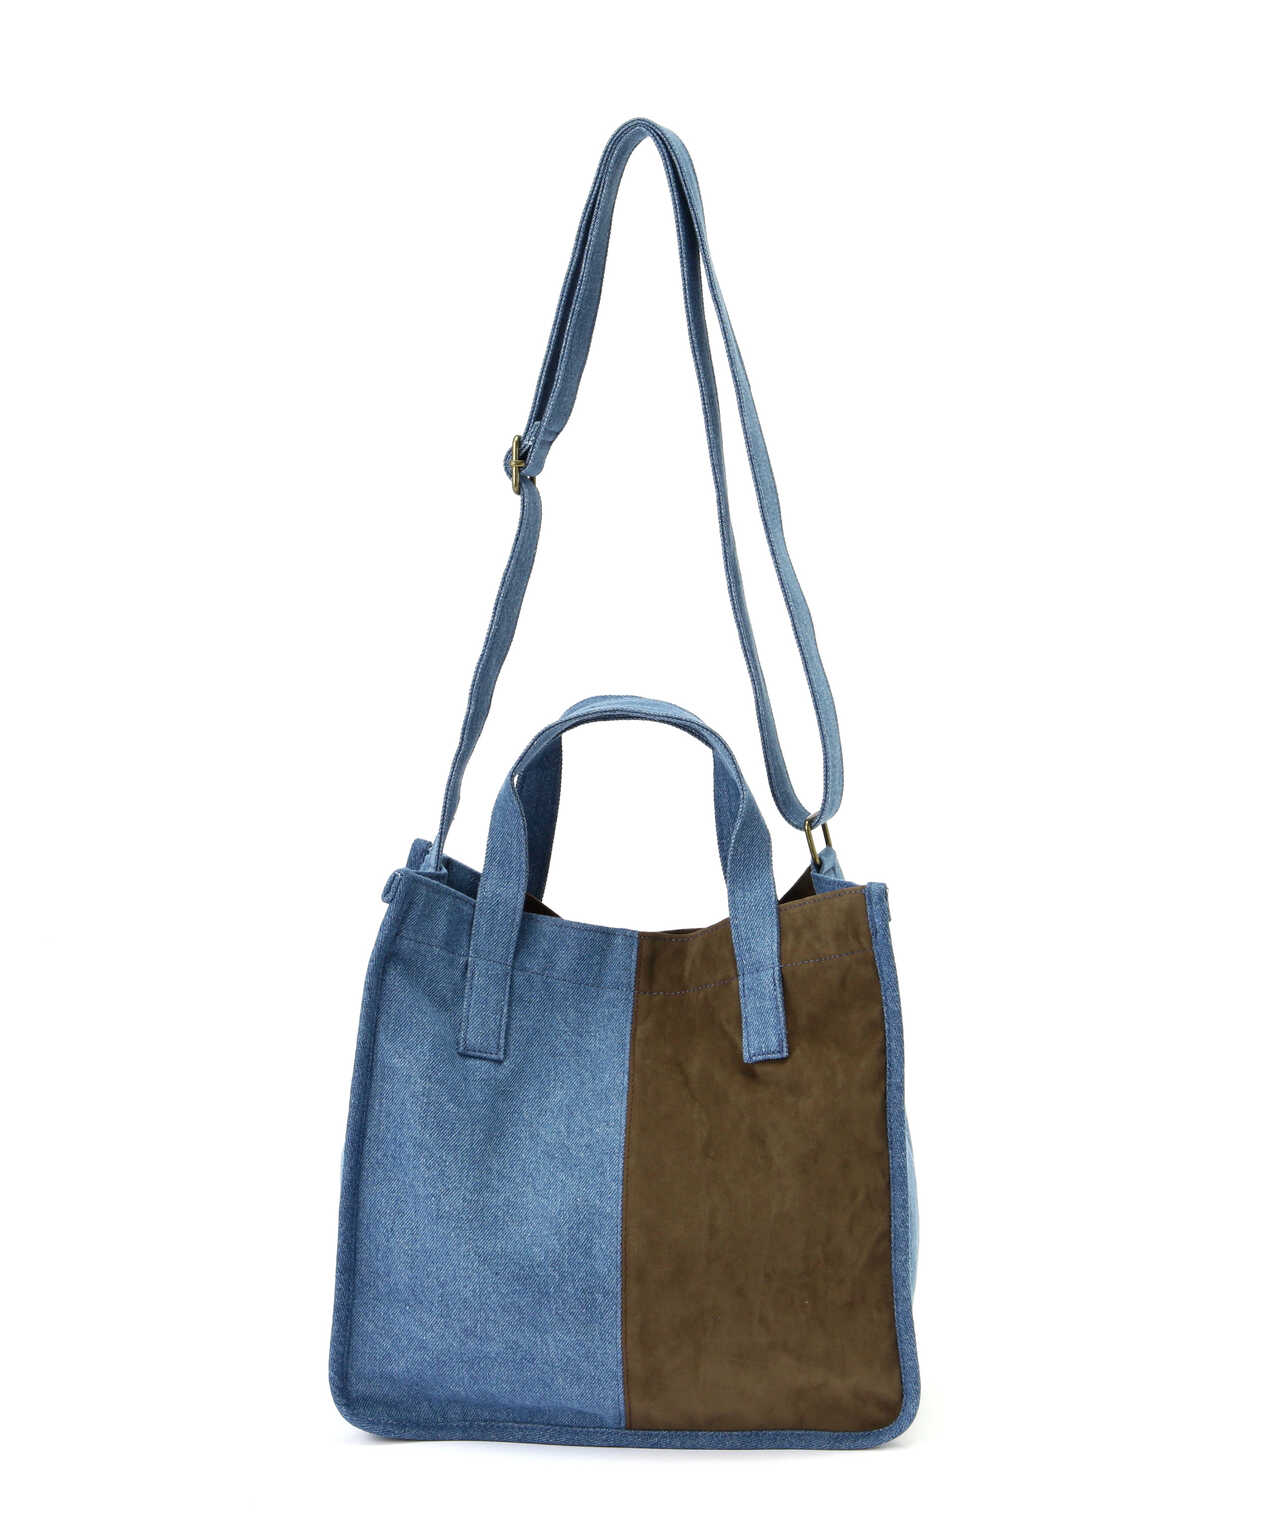 ≪WEB&DEPOT限定≫FAKE SUEDE COMBI VERTICALLY LONG REMAKE TOTE BAG/トートバッグ